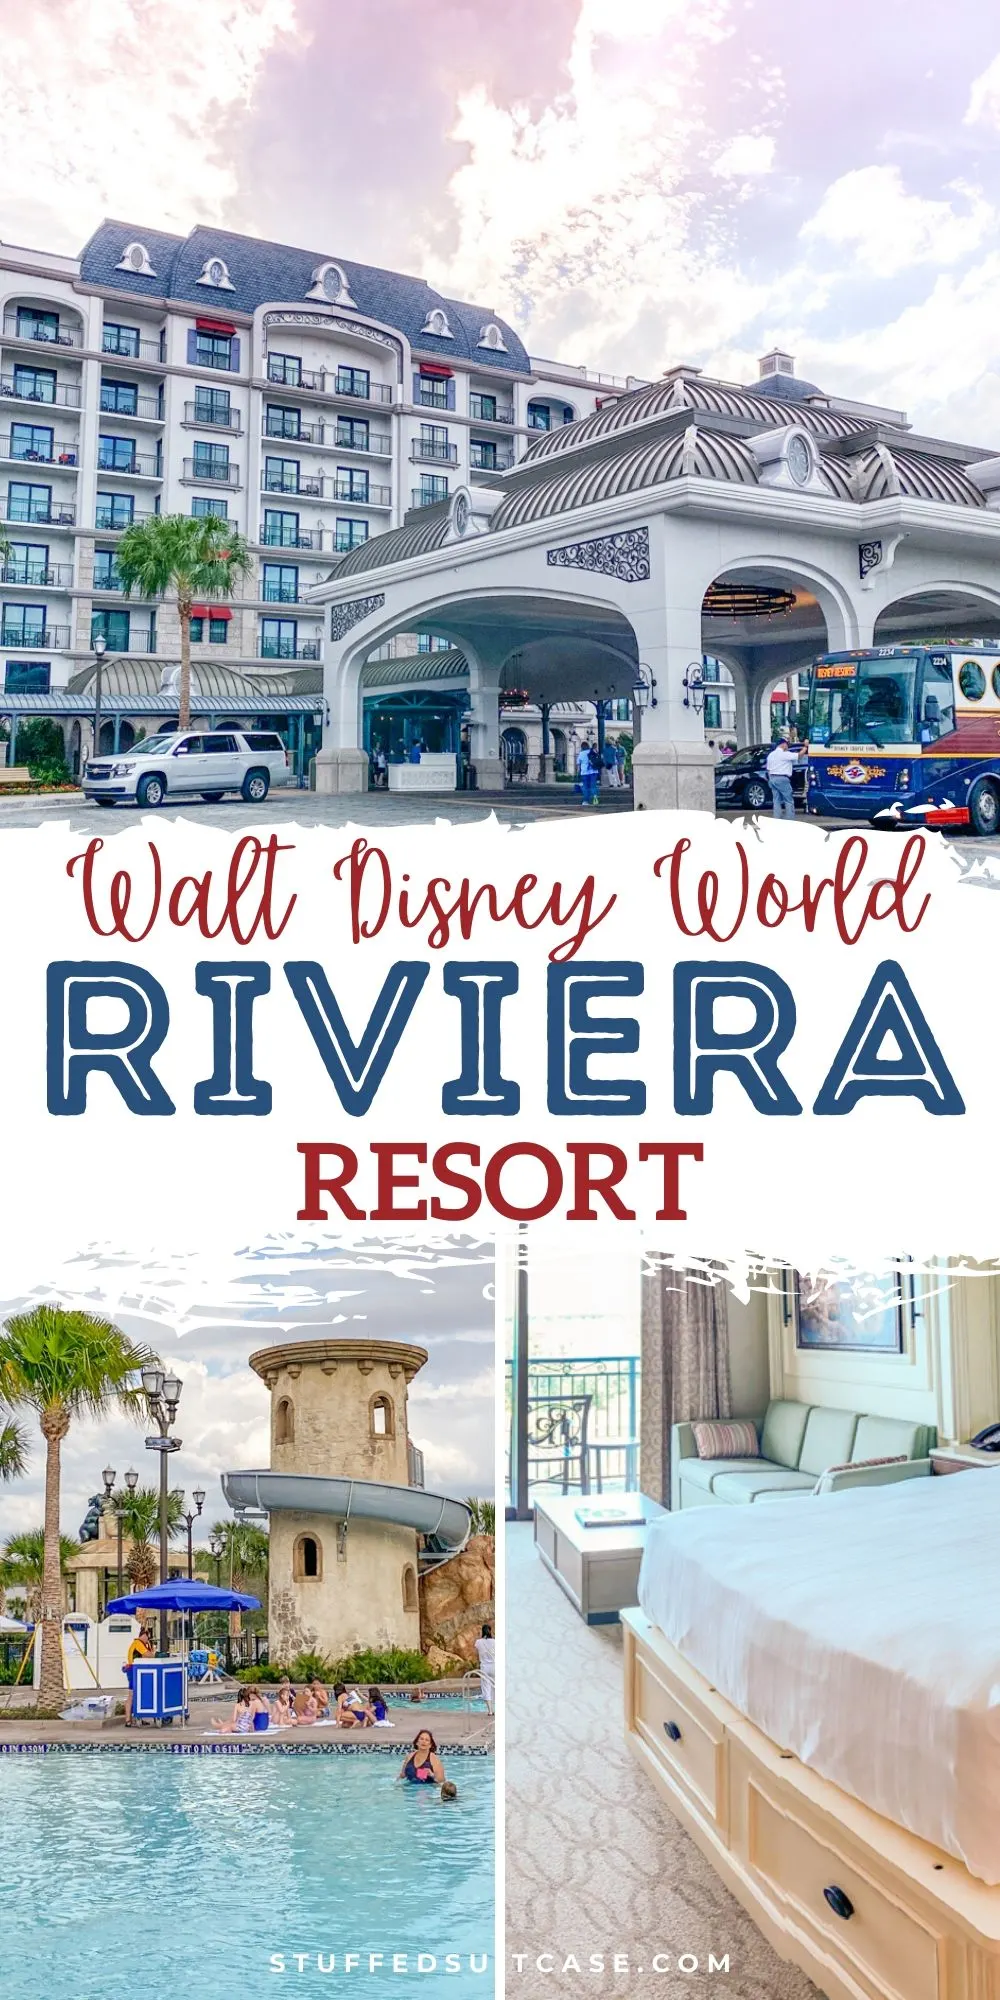 riviera resort image collage for pinterest